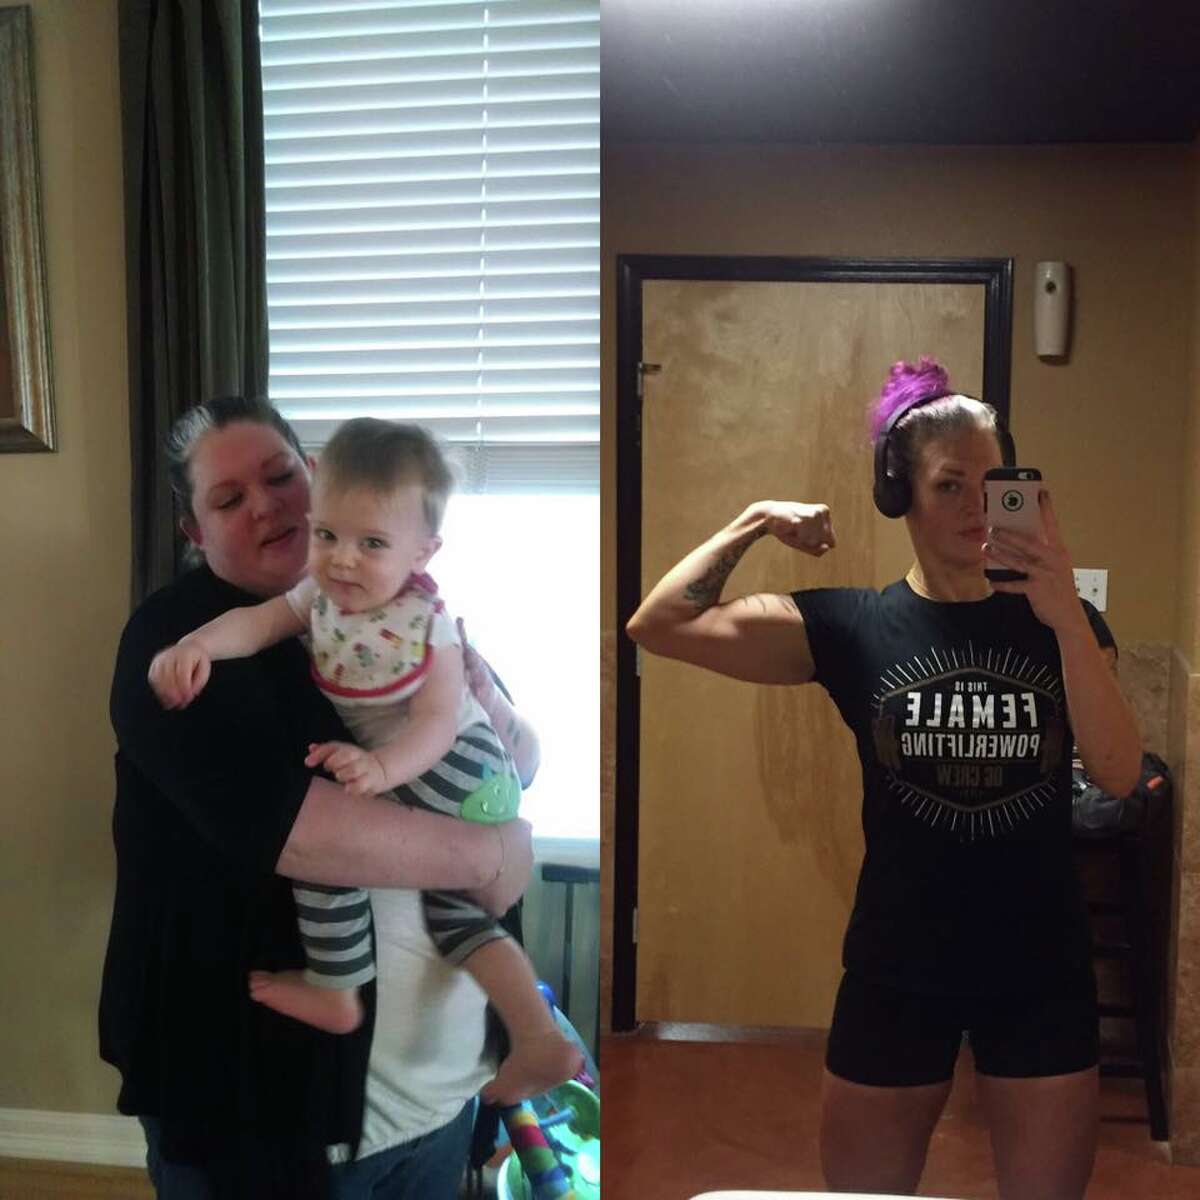 Misty Mitchell, a 36-year-old Wimberley native, has spent the last 20 months chiseling her goal body -- from 296 pounds to 137 -- without pills or products. Health or weight was never an issue in Mitchell's life until family matters slowed her down.